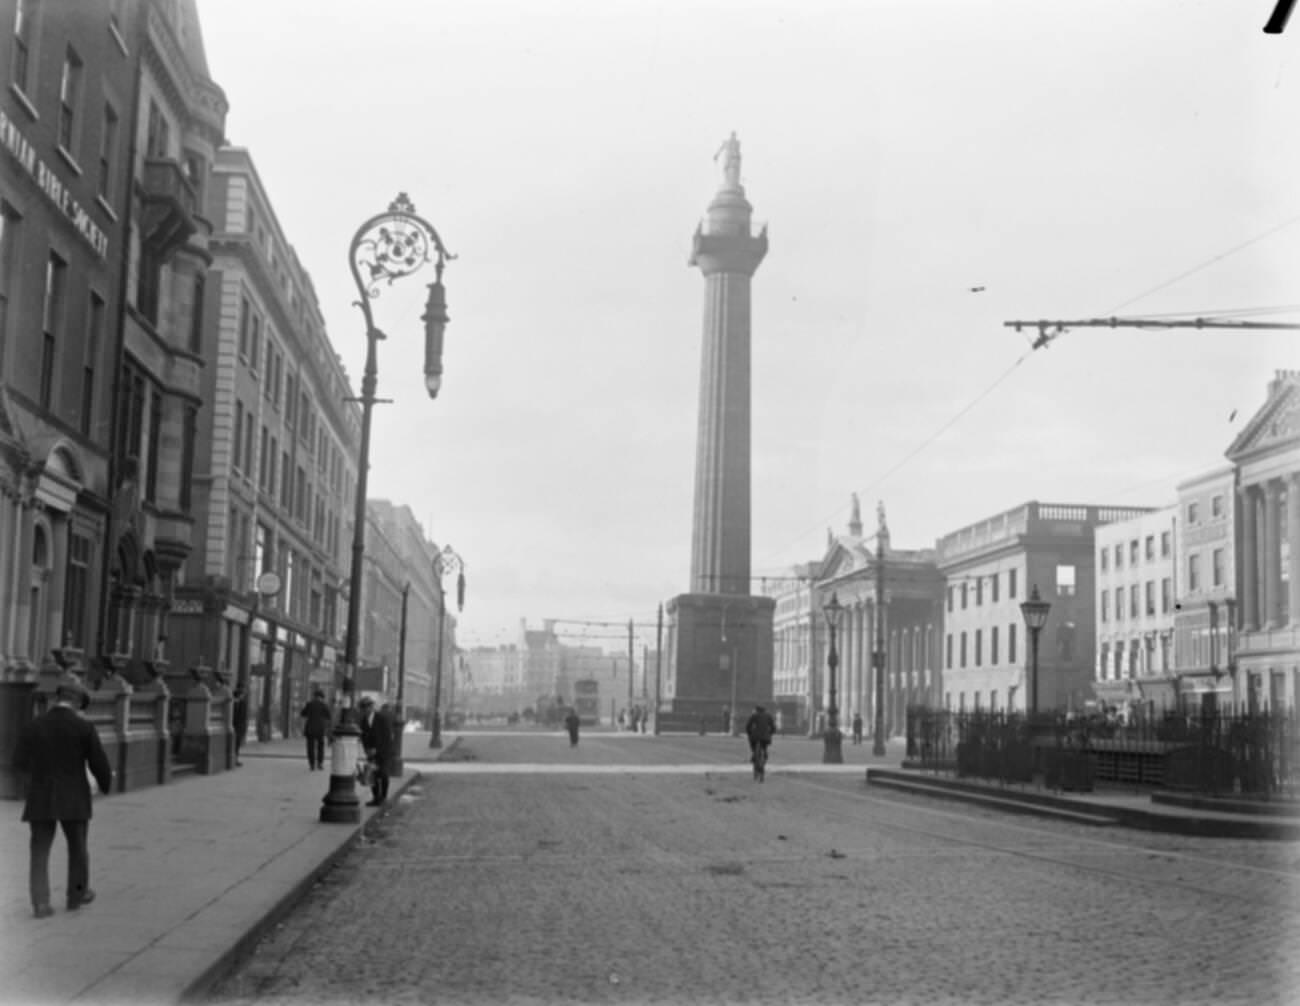 Sackville Street during midday, 1922.